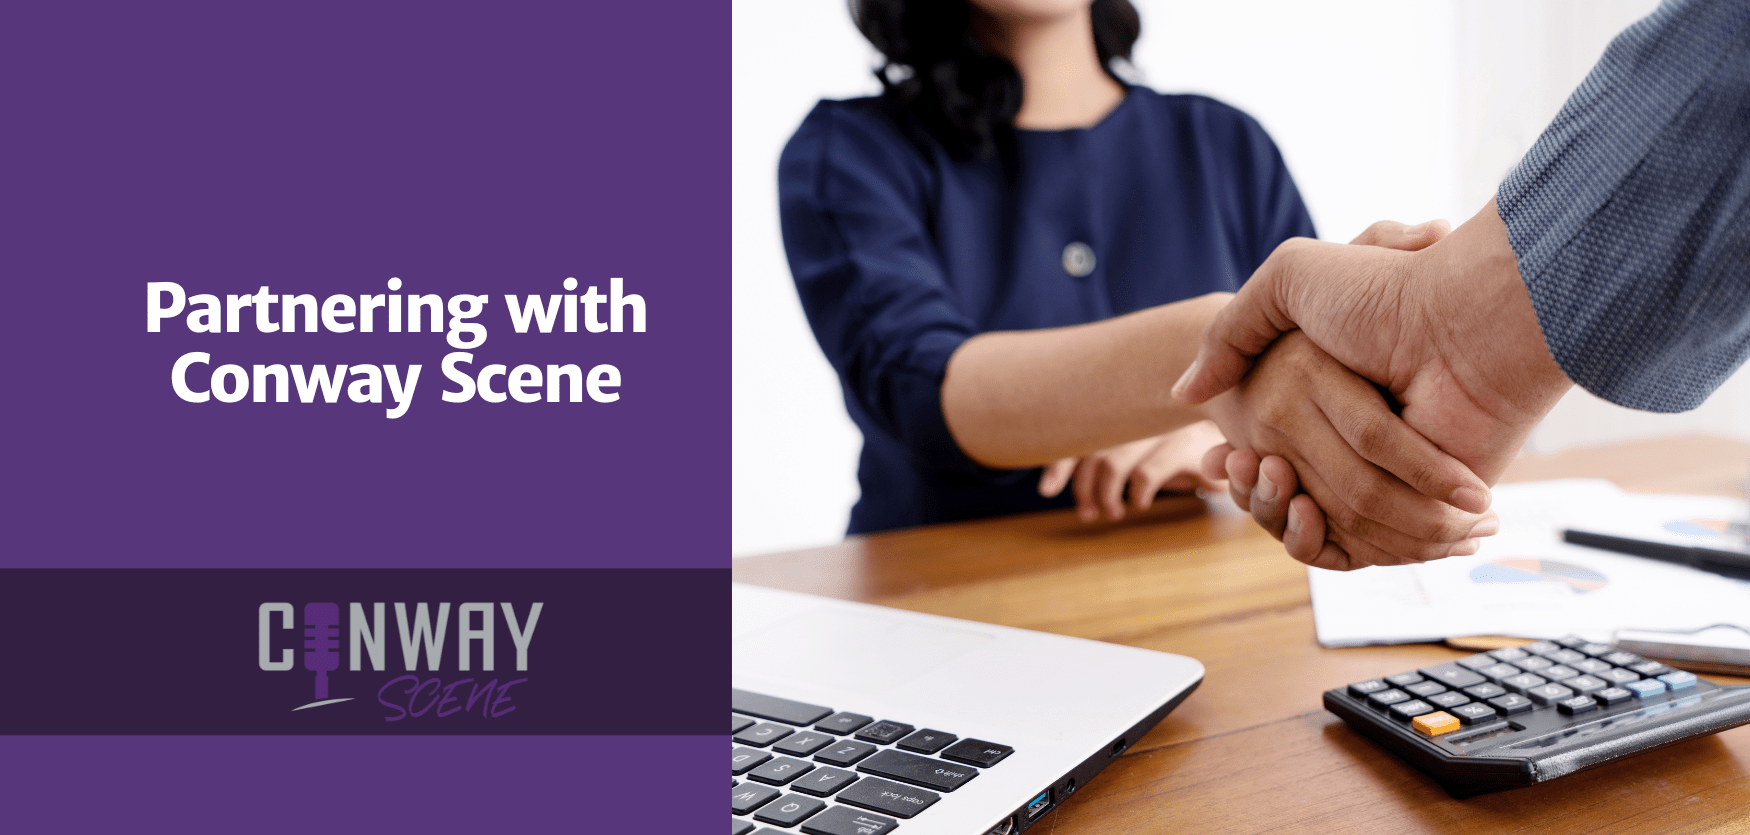 Partnering with Conway Scene